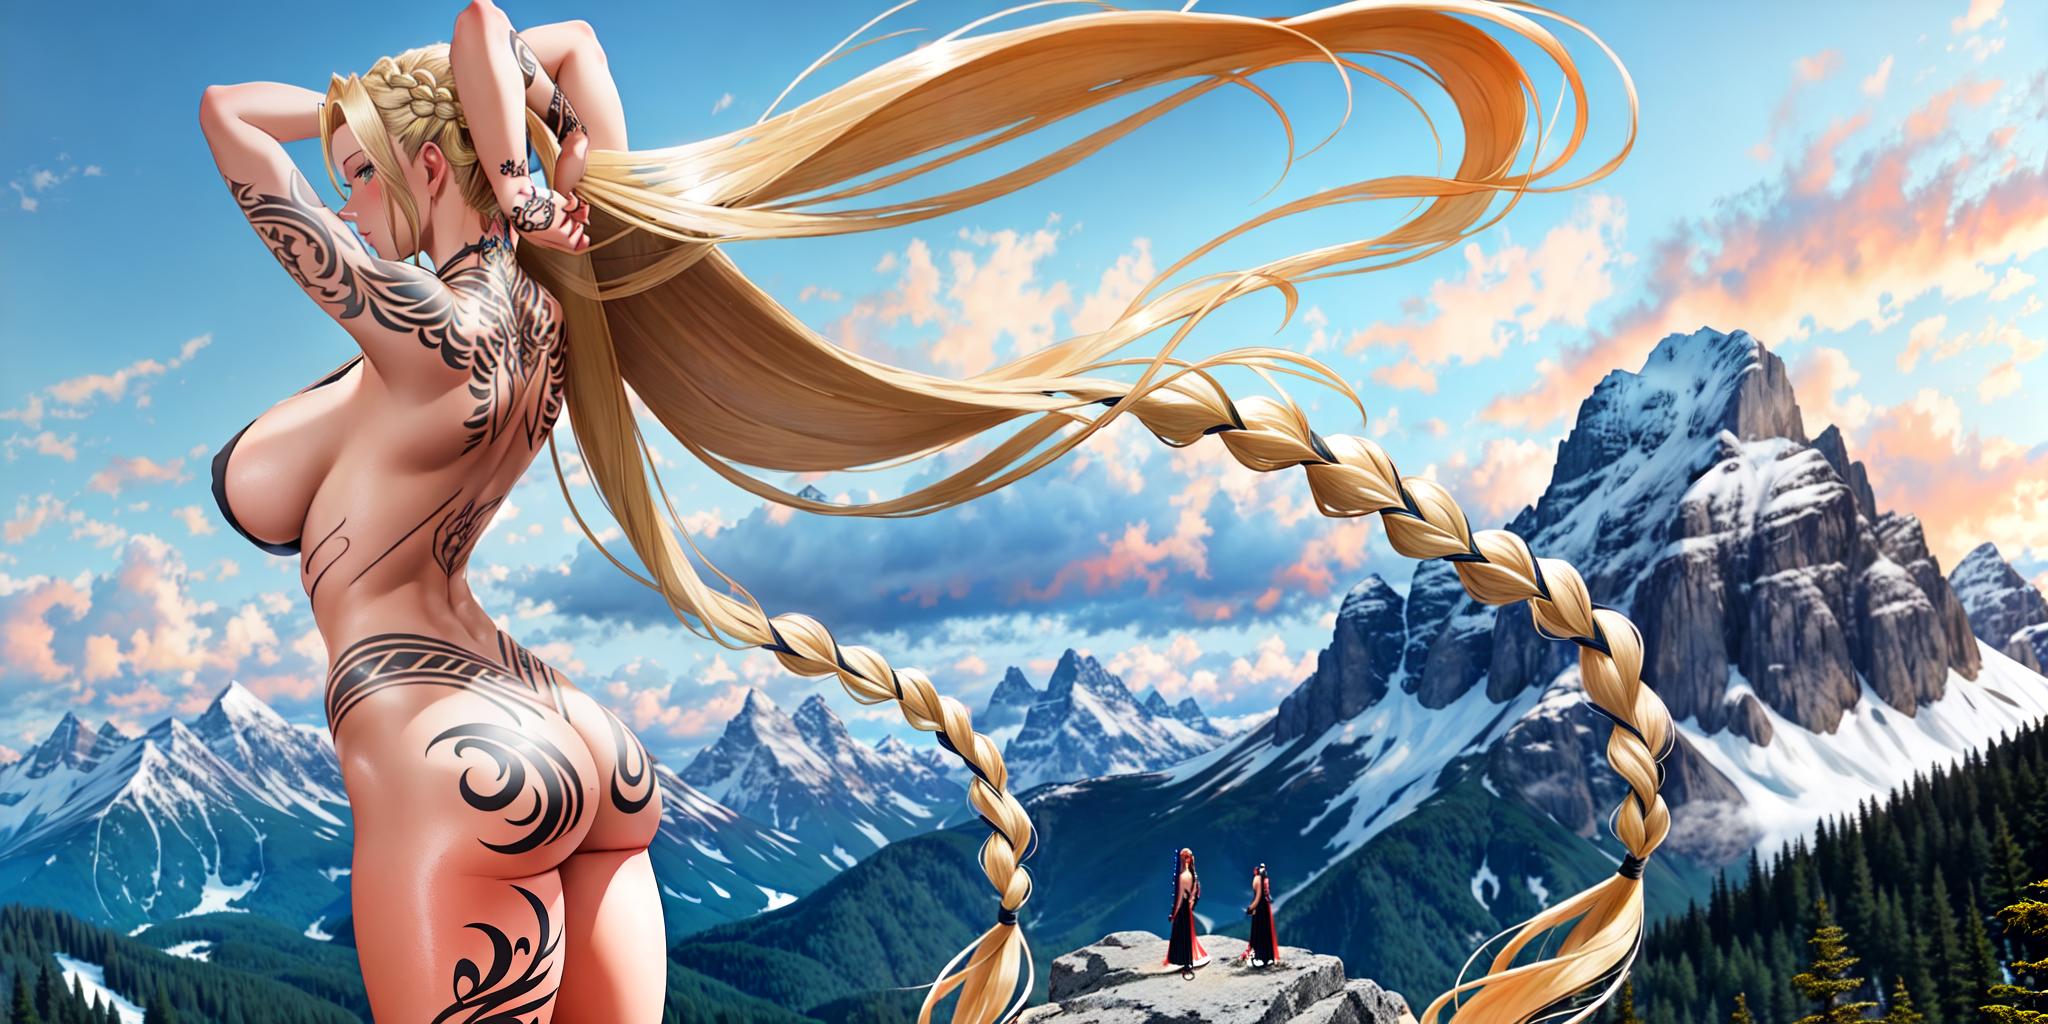  backside of a long braided blonde hair tattooed nude woman with her arms above her head standing on a mountain side